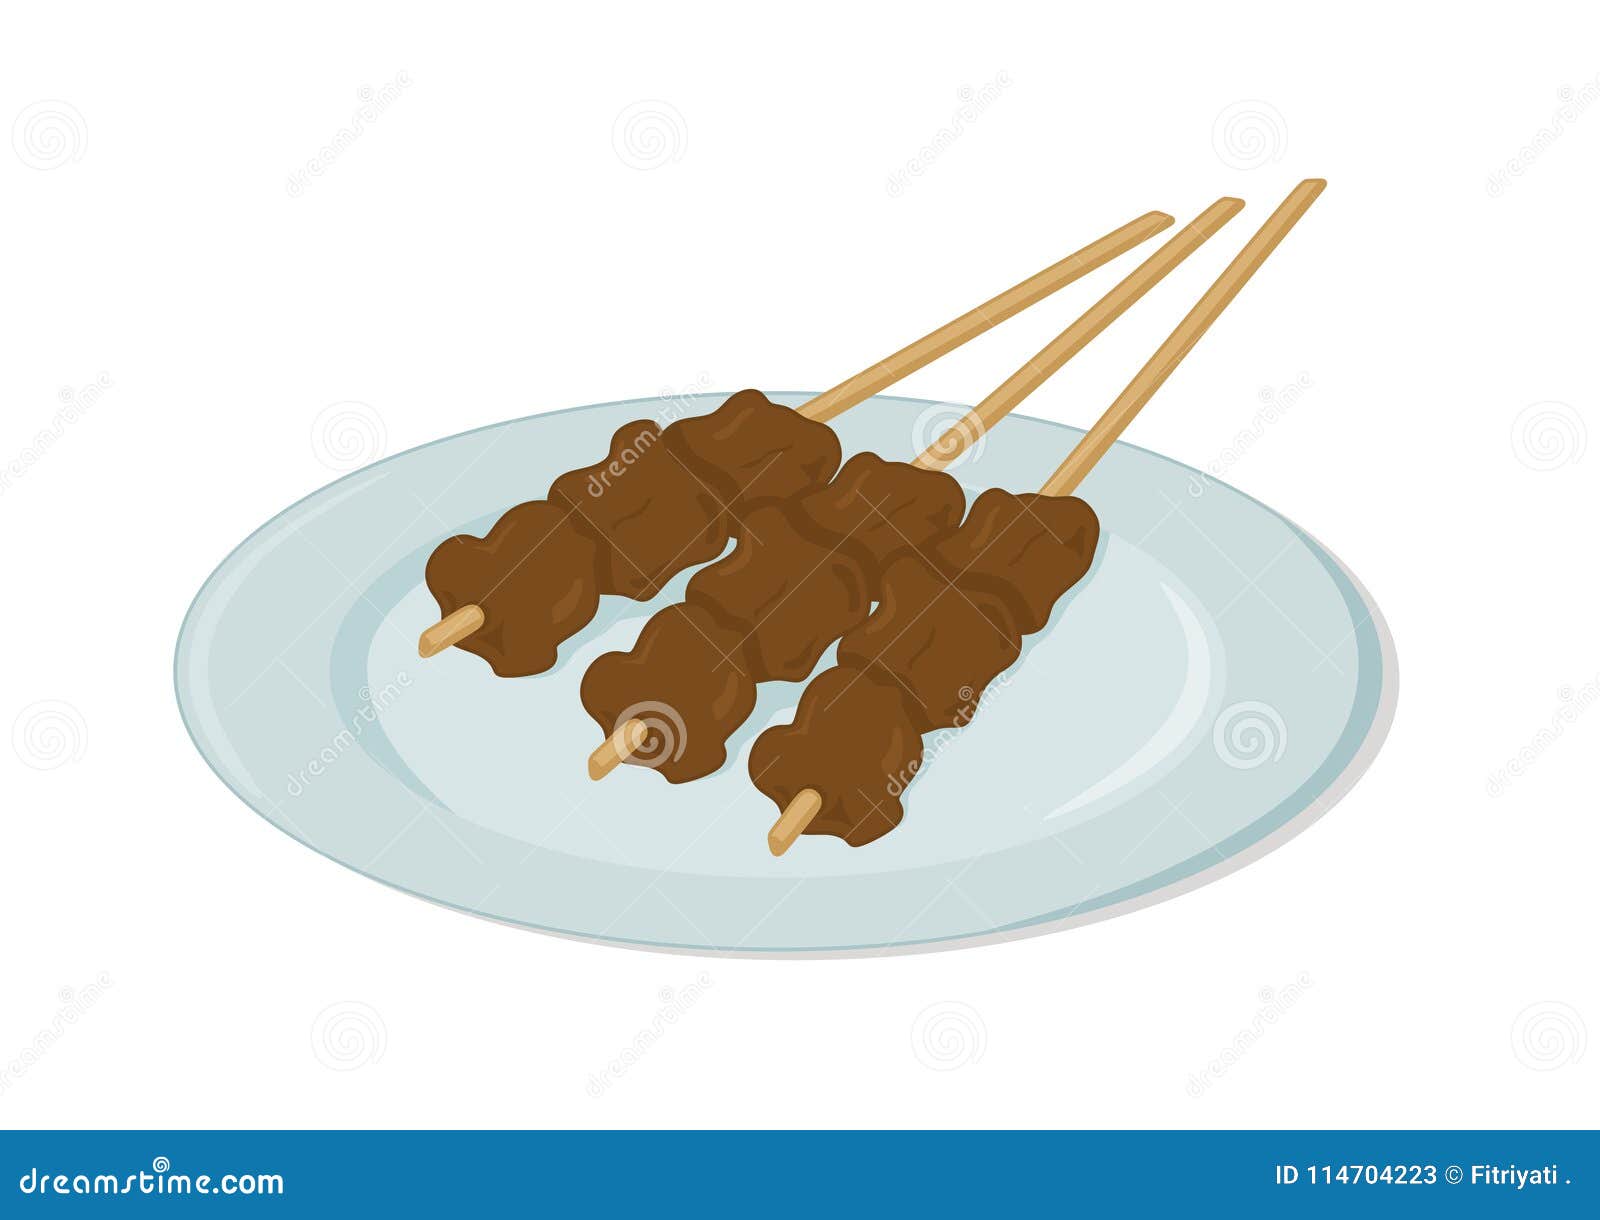 Sate Cartoons, Illustrations & Vector Stock Images - 282 Pictures to